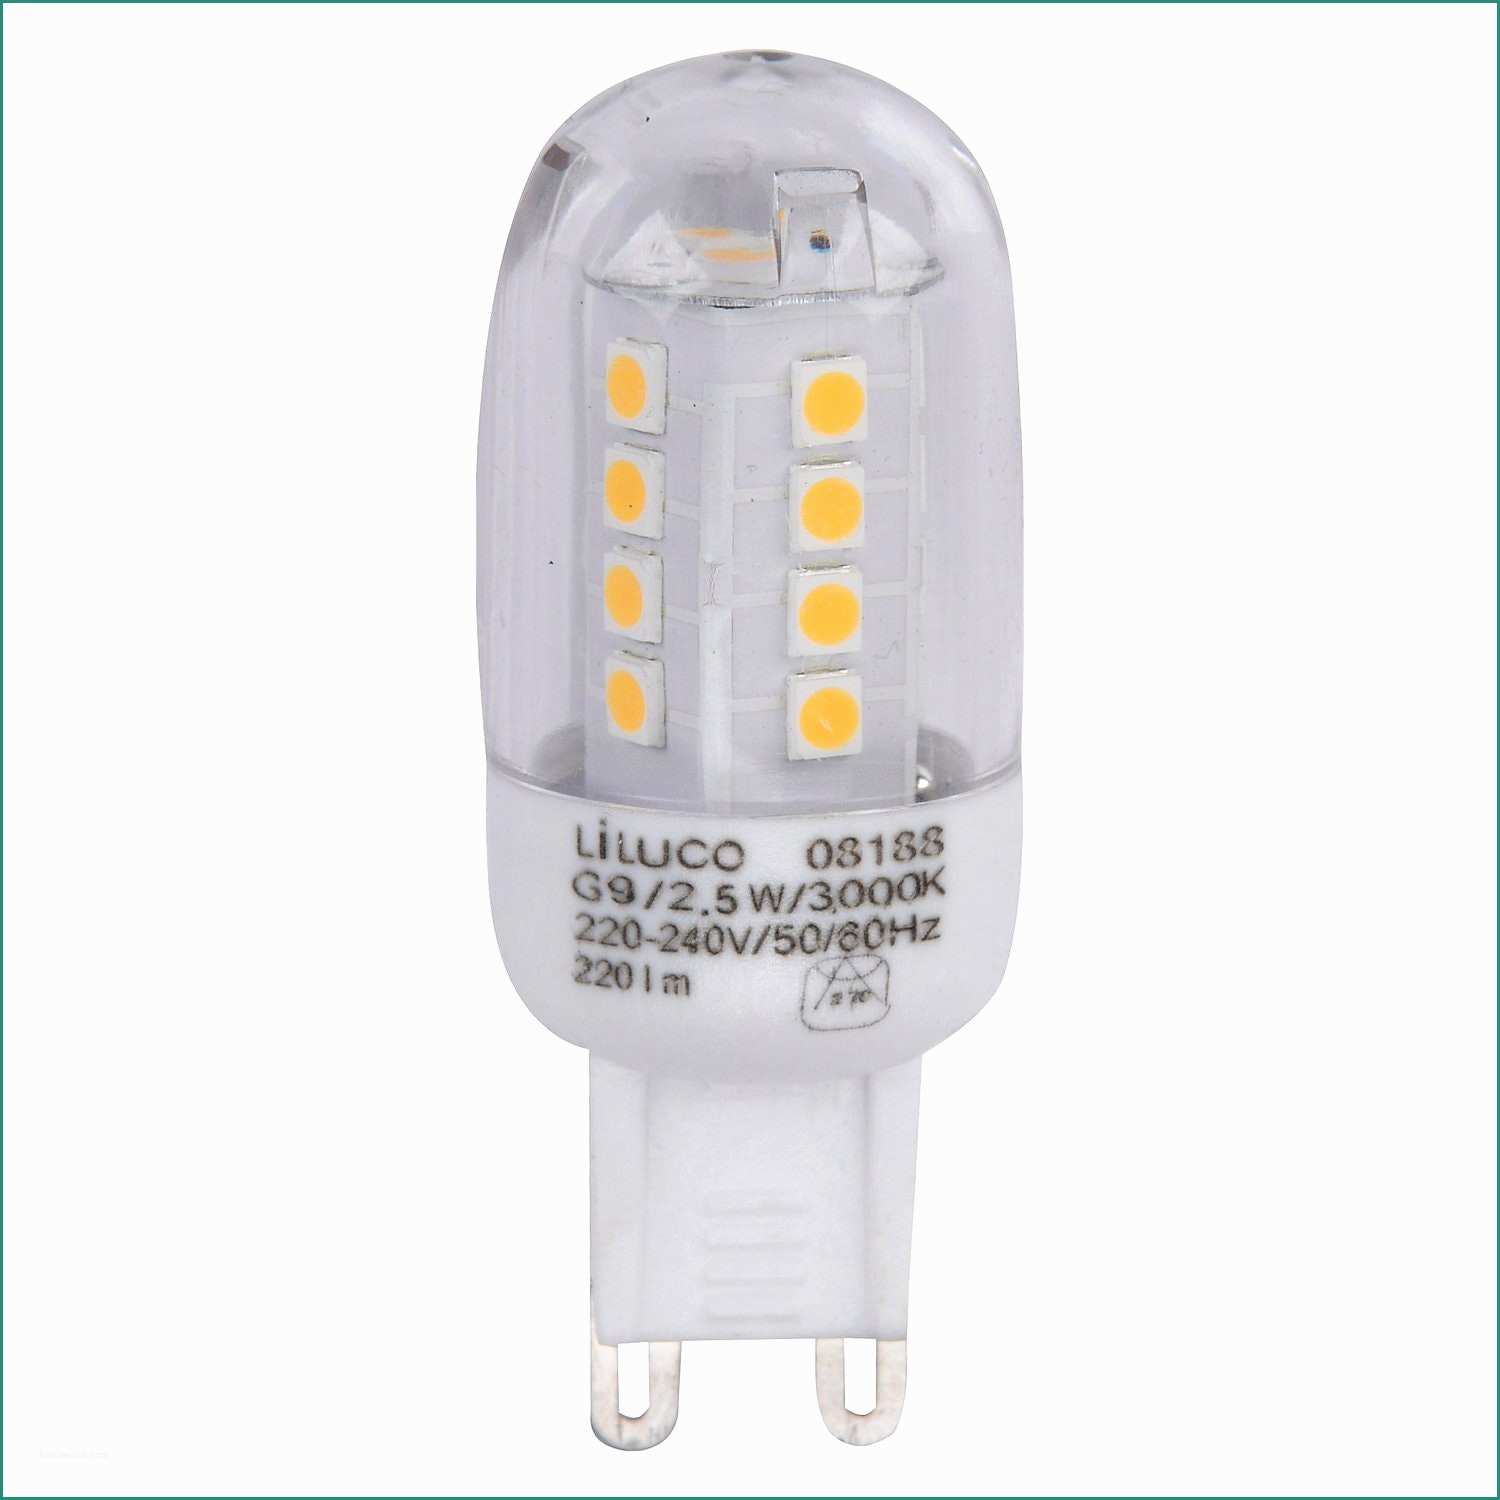 Lampada Led Rs Mm Dimmerabile E Led Dimmbar Led Trio Modern Flg G Kaufen Dimmbar Test Osram with